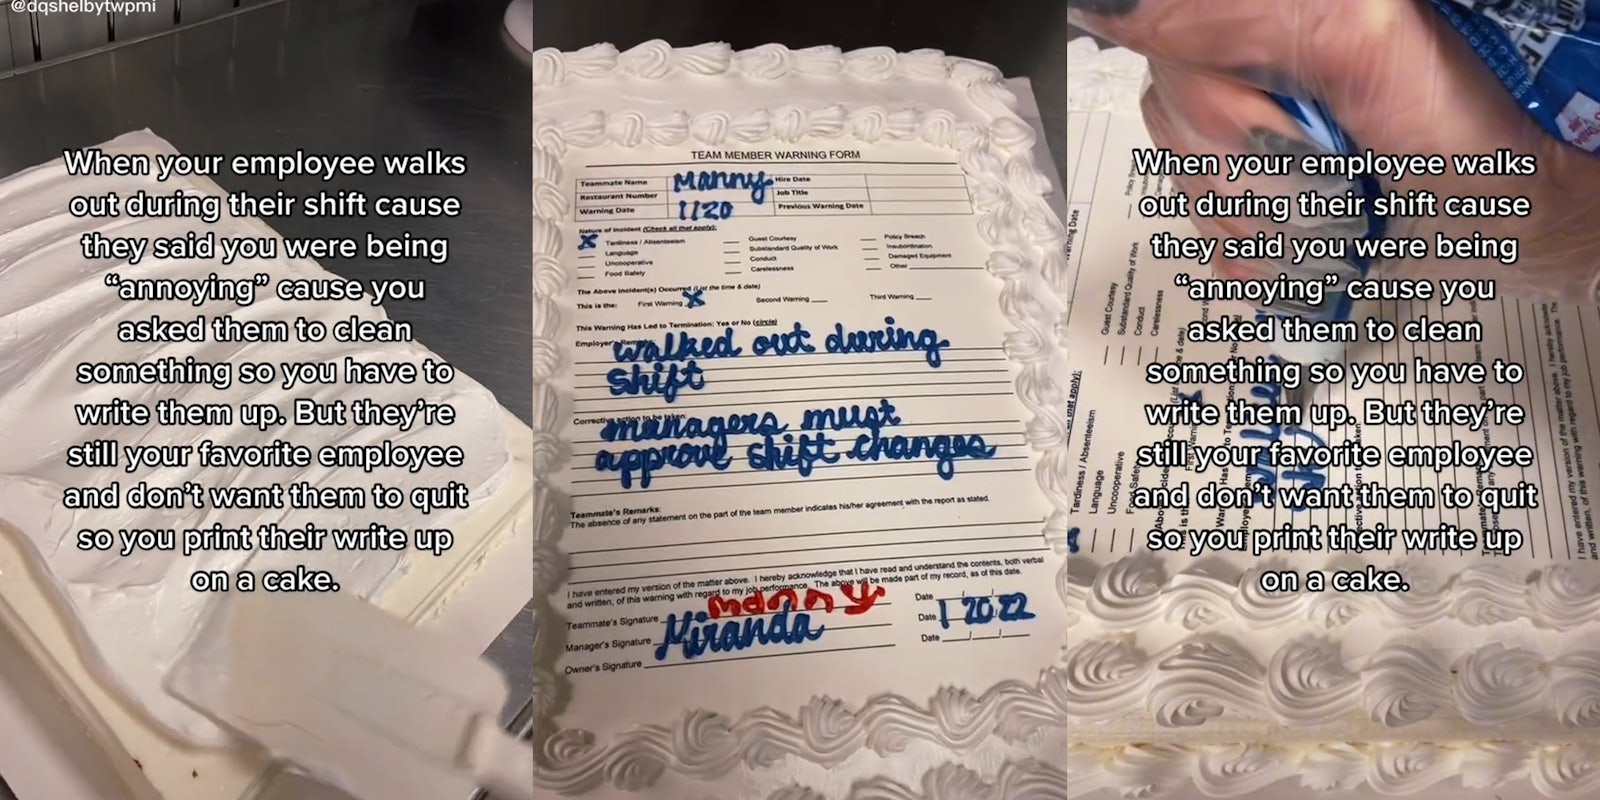 manager writing up employee on a cake with caption 'when your employee walks out during their shift cause they said you were being 'annoying' cause you asked them to clean something so you have to write them up. But they're still your favorite employee and don't want them to quit so you print their write up on a cake.'